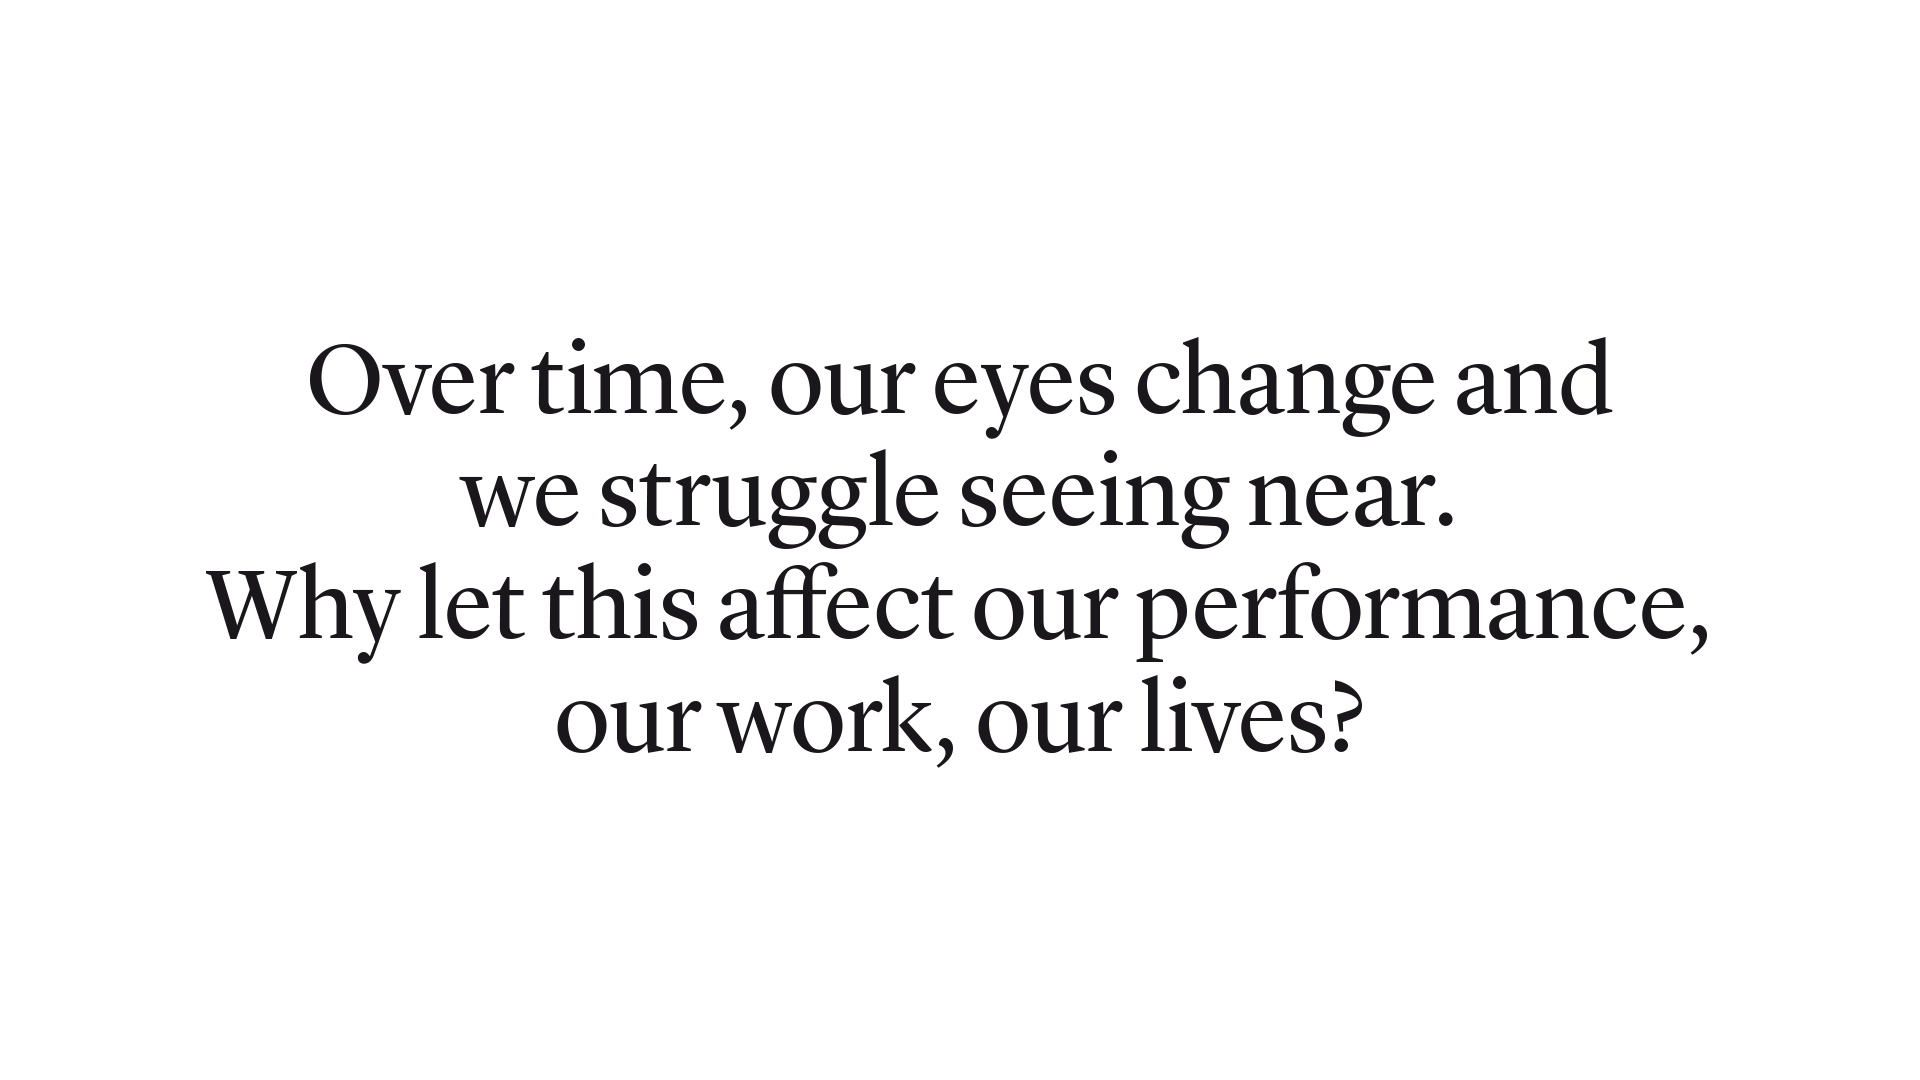 Over time, our eyes change and we struggle seeing near. Why let this affect our performance, our work, our lives